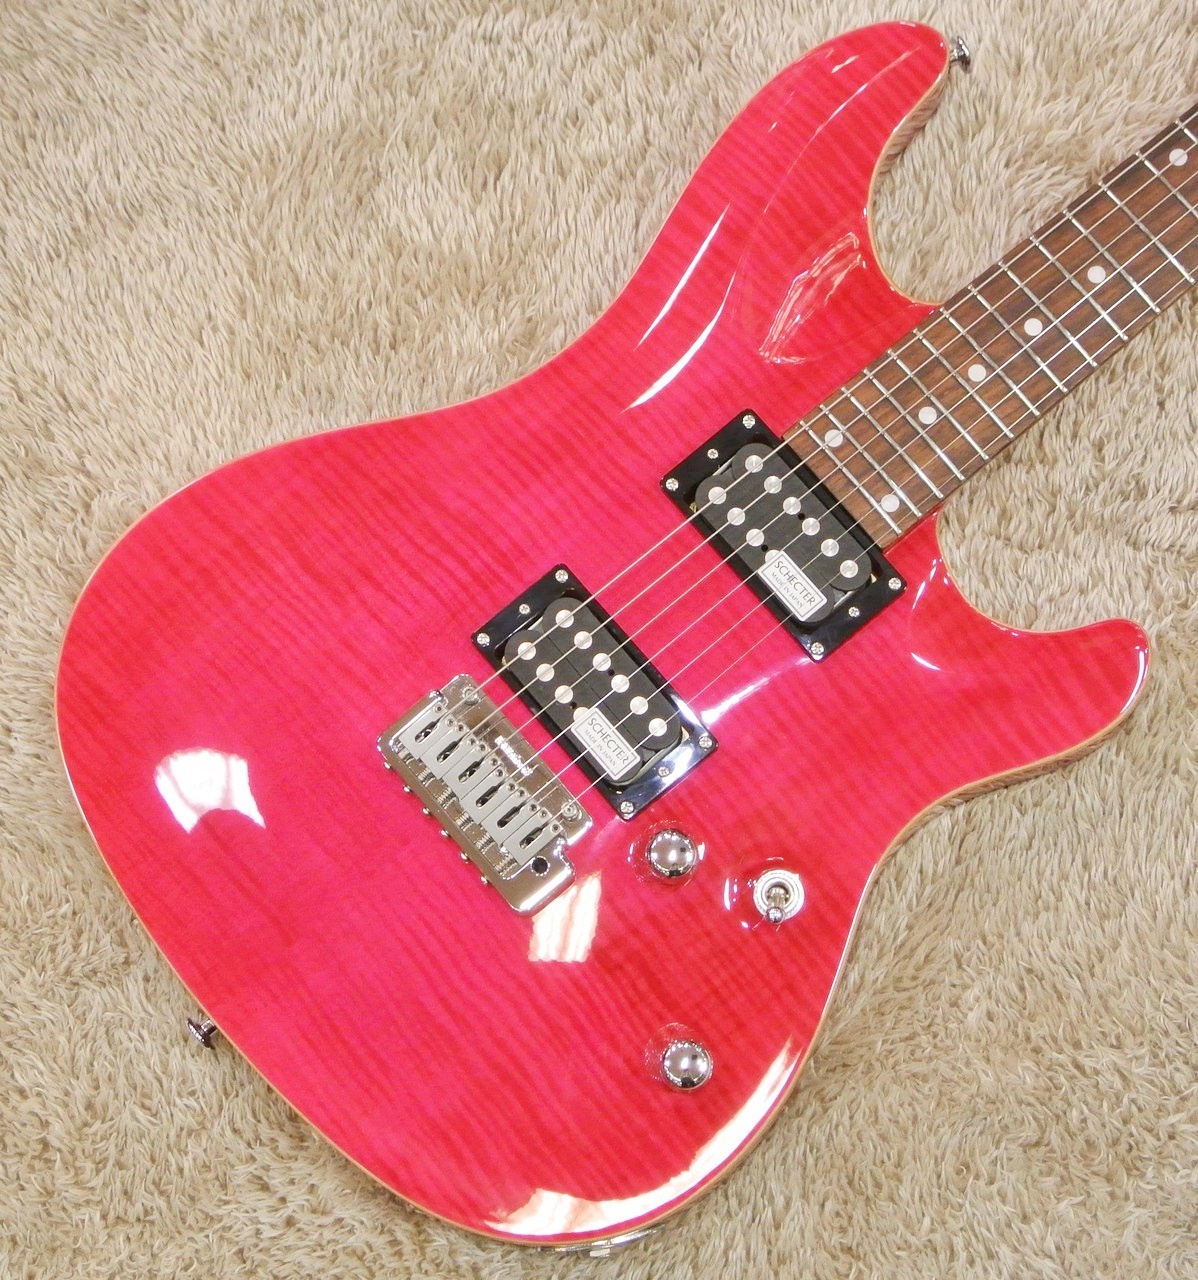 SCHECTER RJ-1-24-VTR / PINK【アウトレット特価】【生産完了モデル